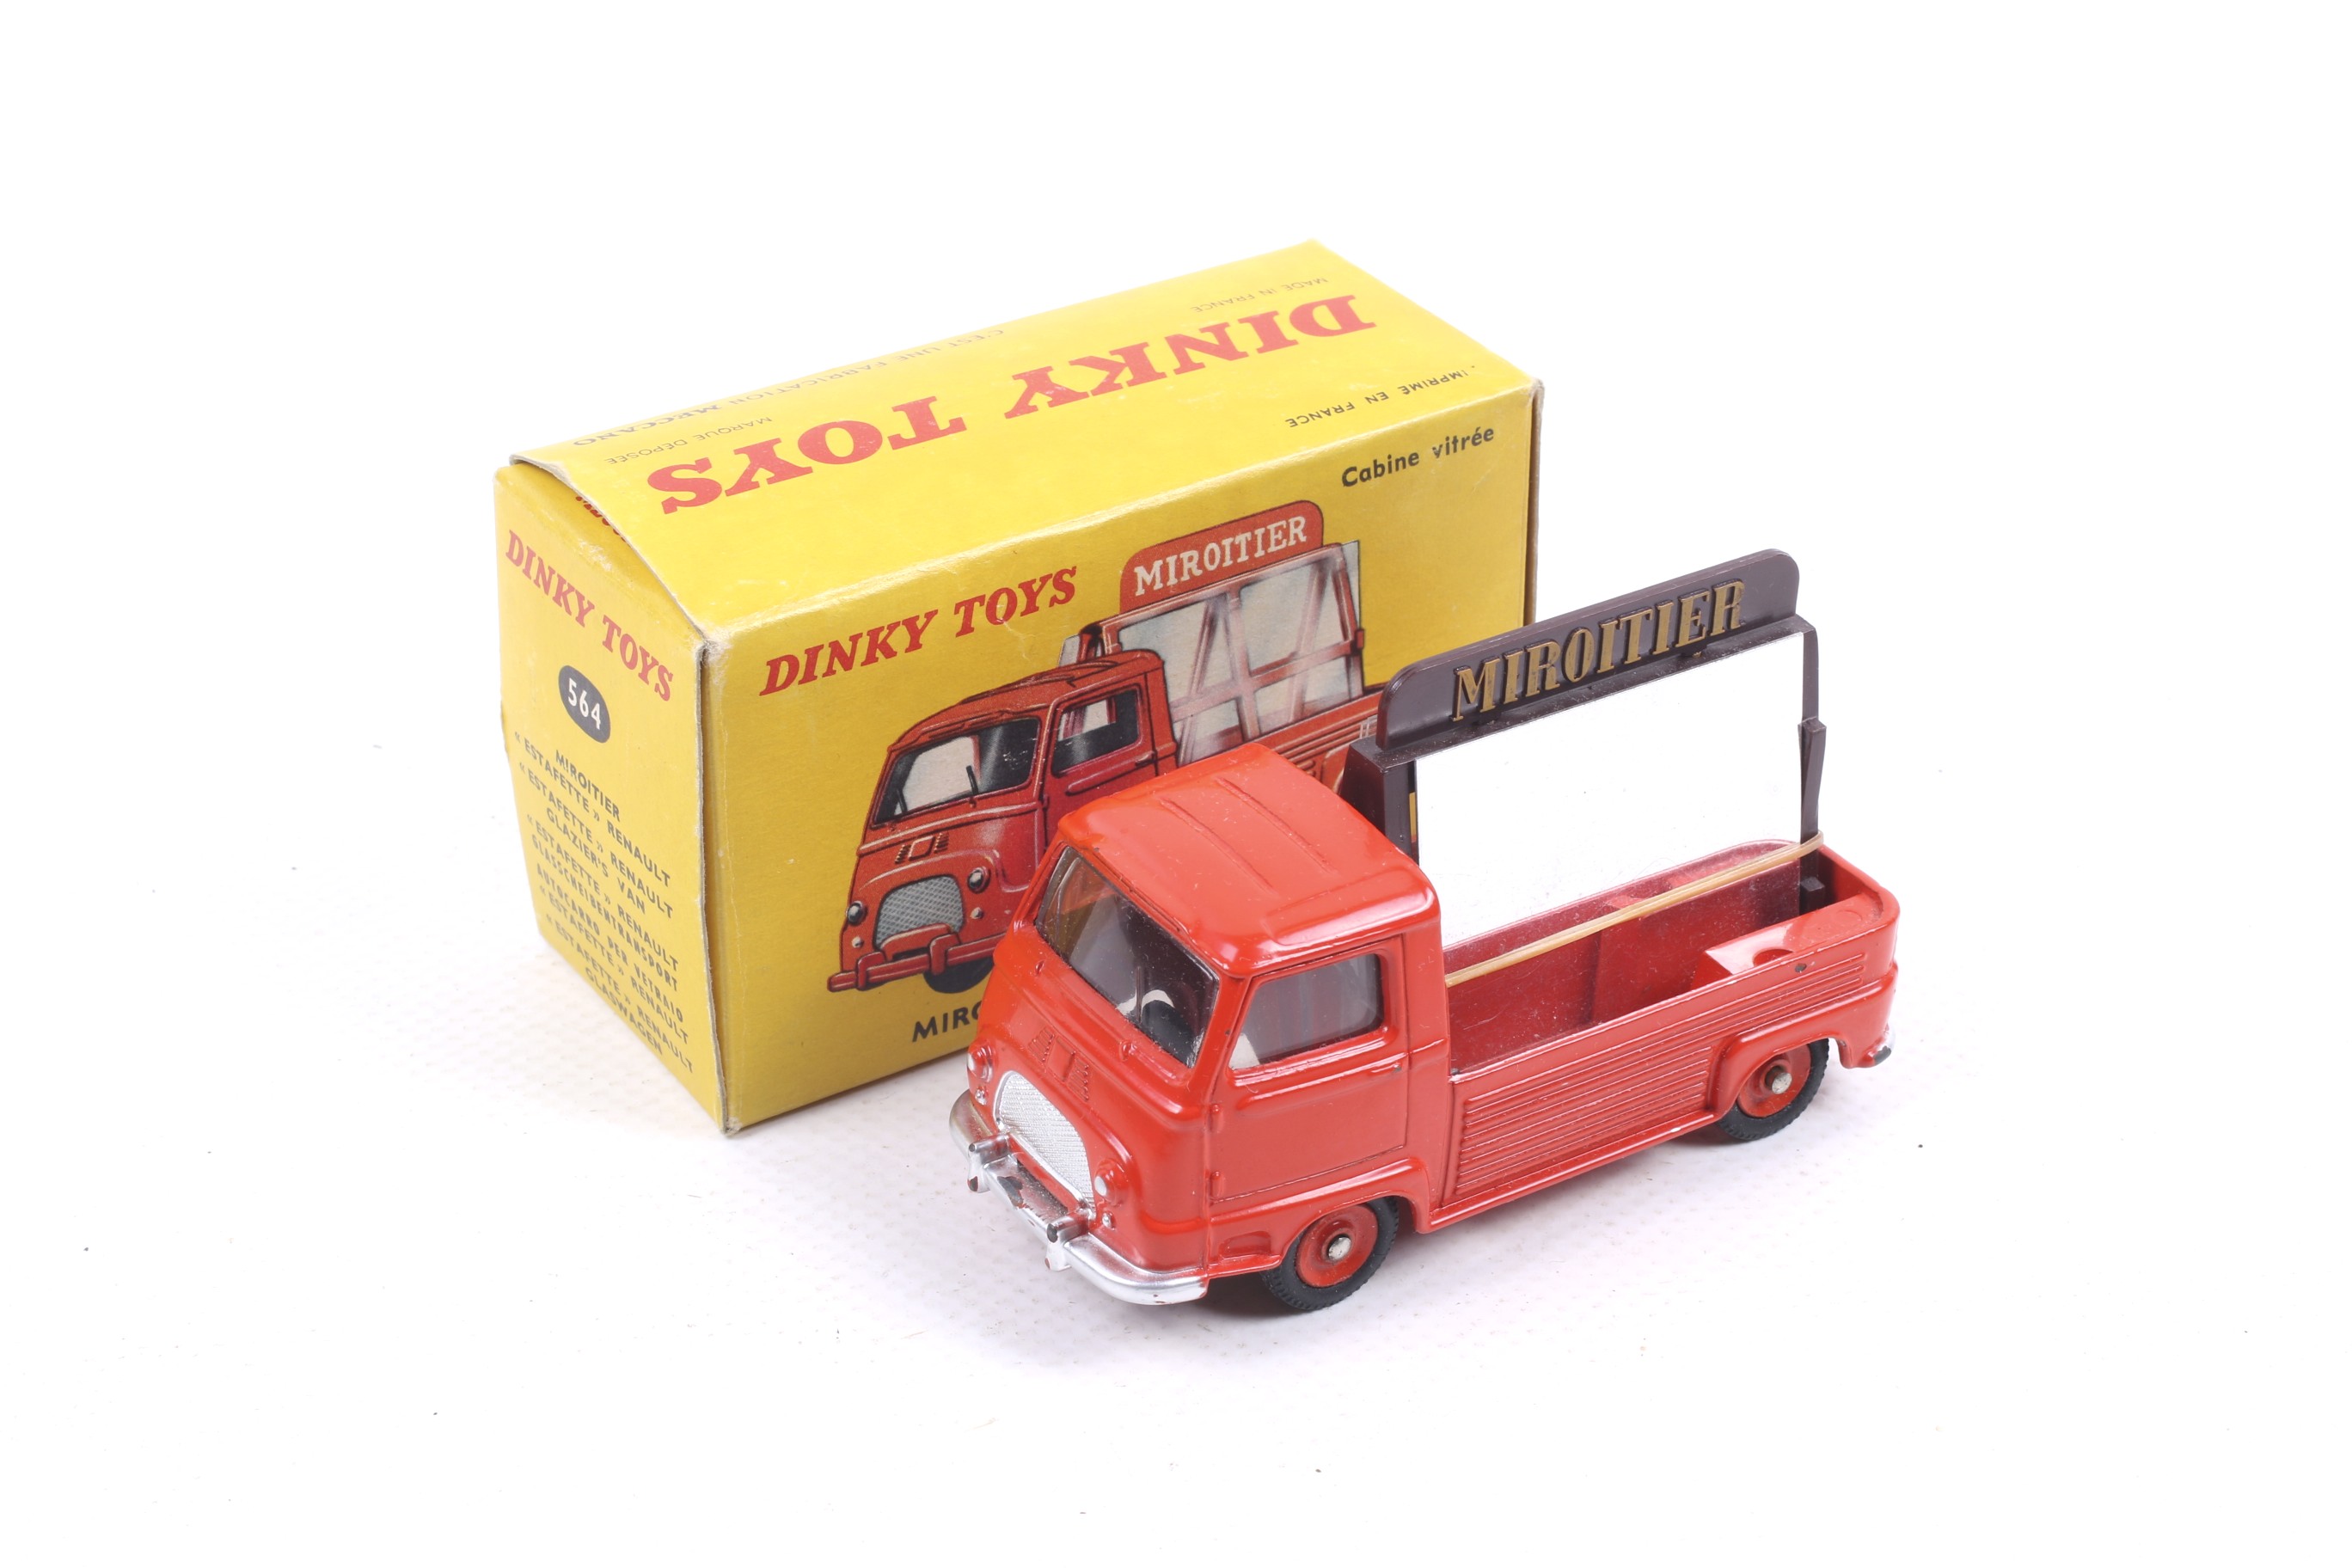 A French Dinky diecast Miroitier van. No.